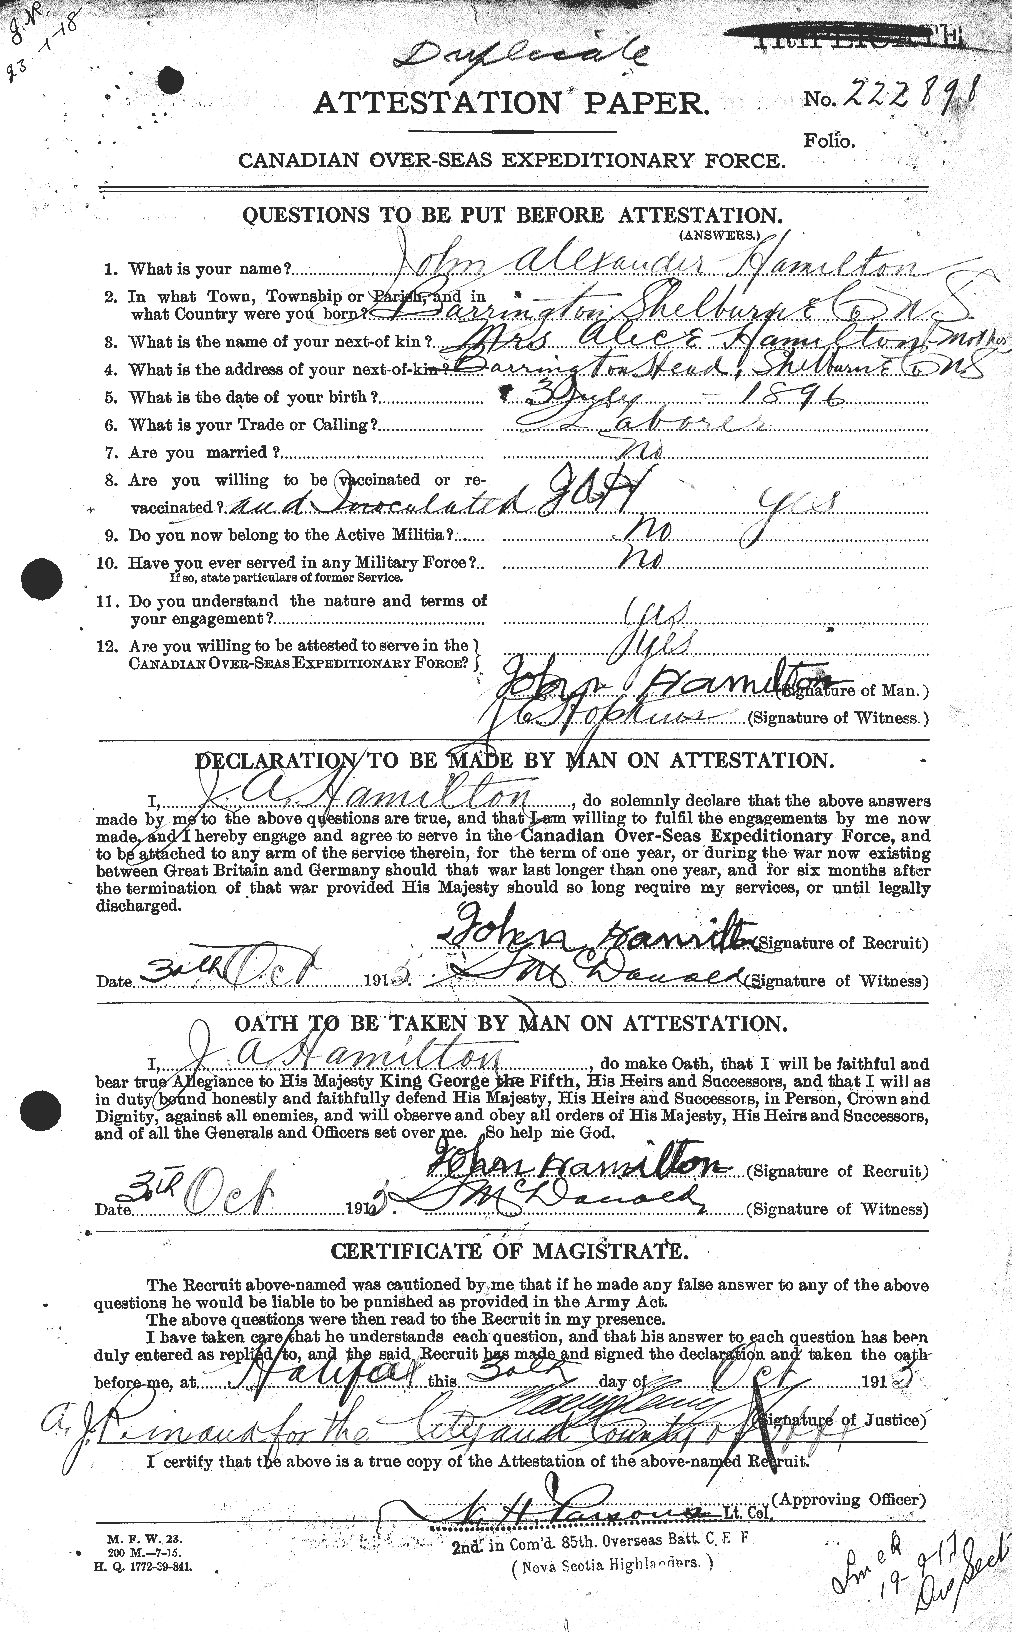 Personnel Records of the First World War - CEF 373063a